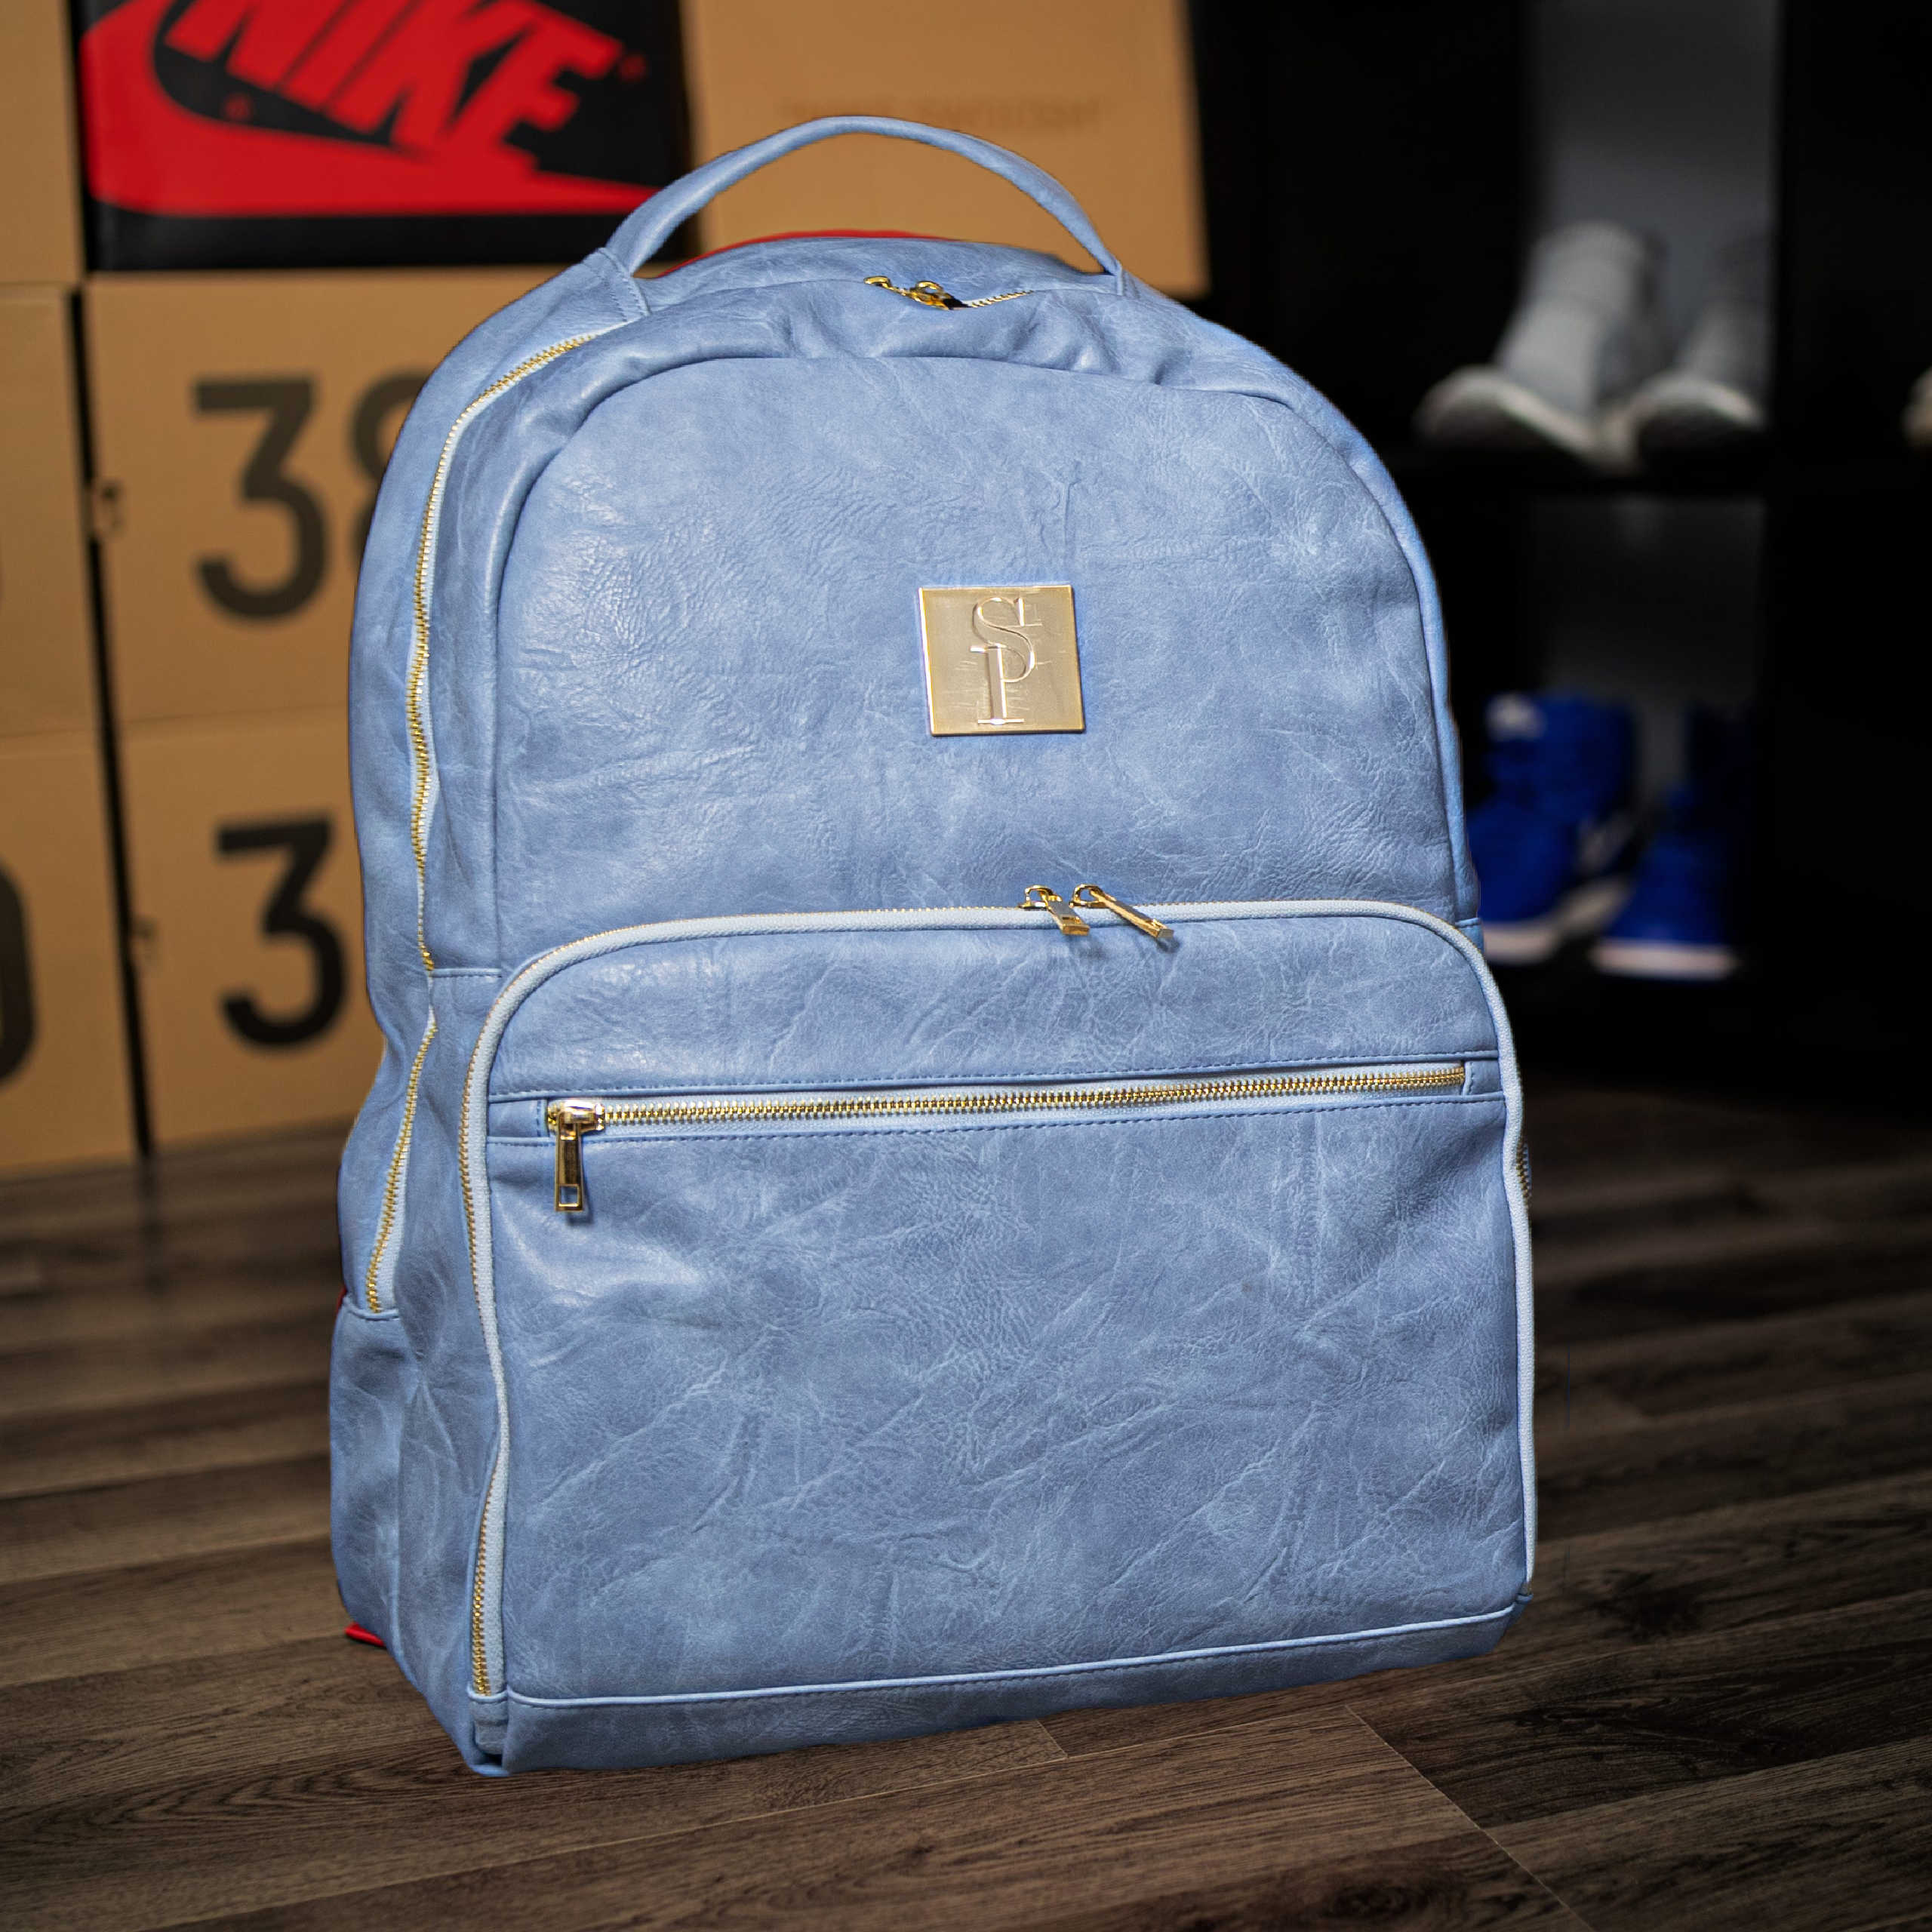 Baby Blue Tumbled Leather Commuter Bag (100 Made) - Sole Premise